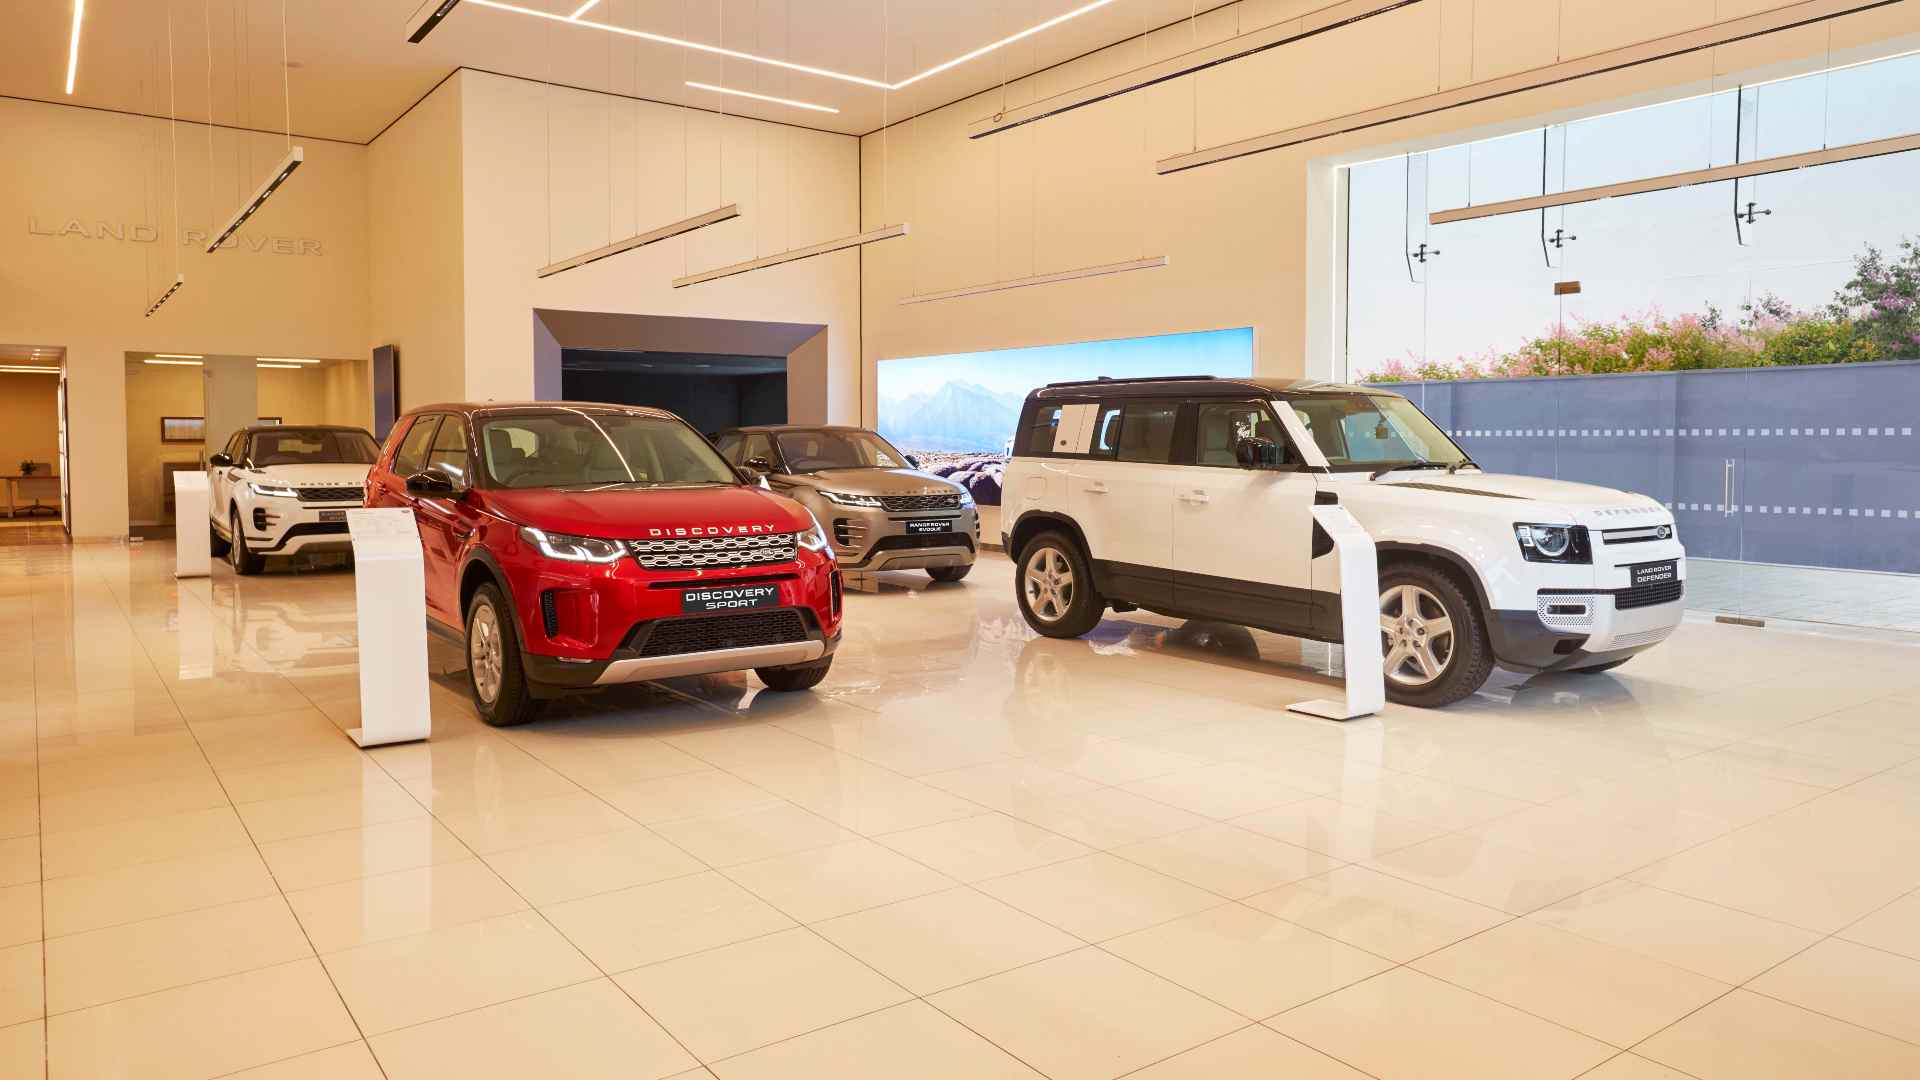  Jaguar Land Rover India lines up 10 model launches and portfolio updates for FY22